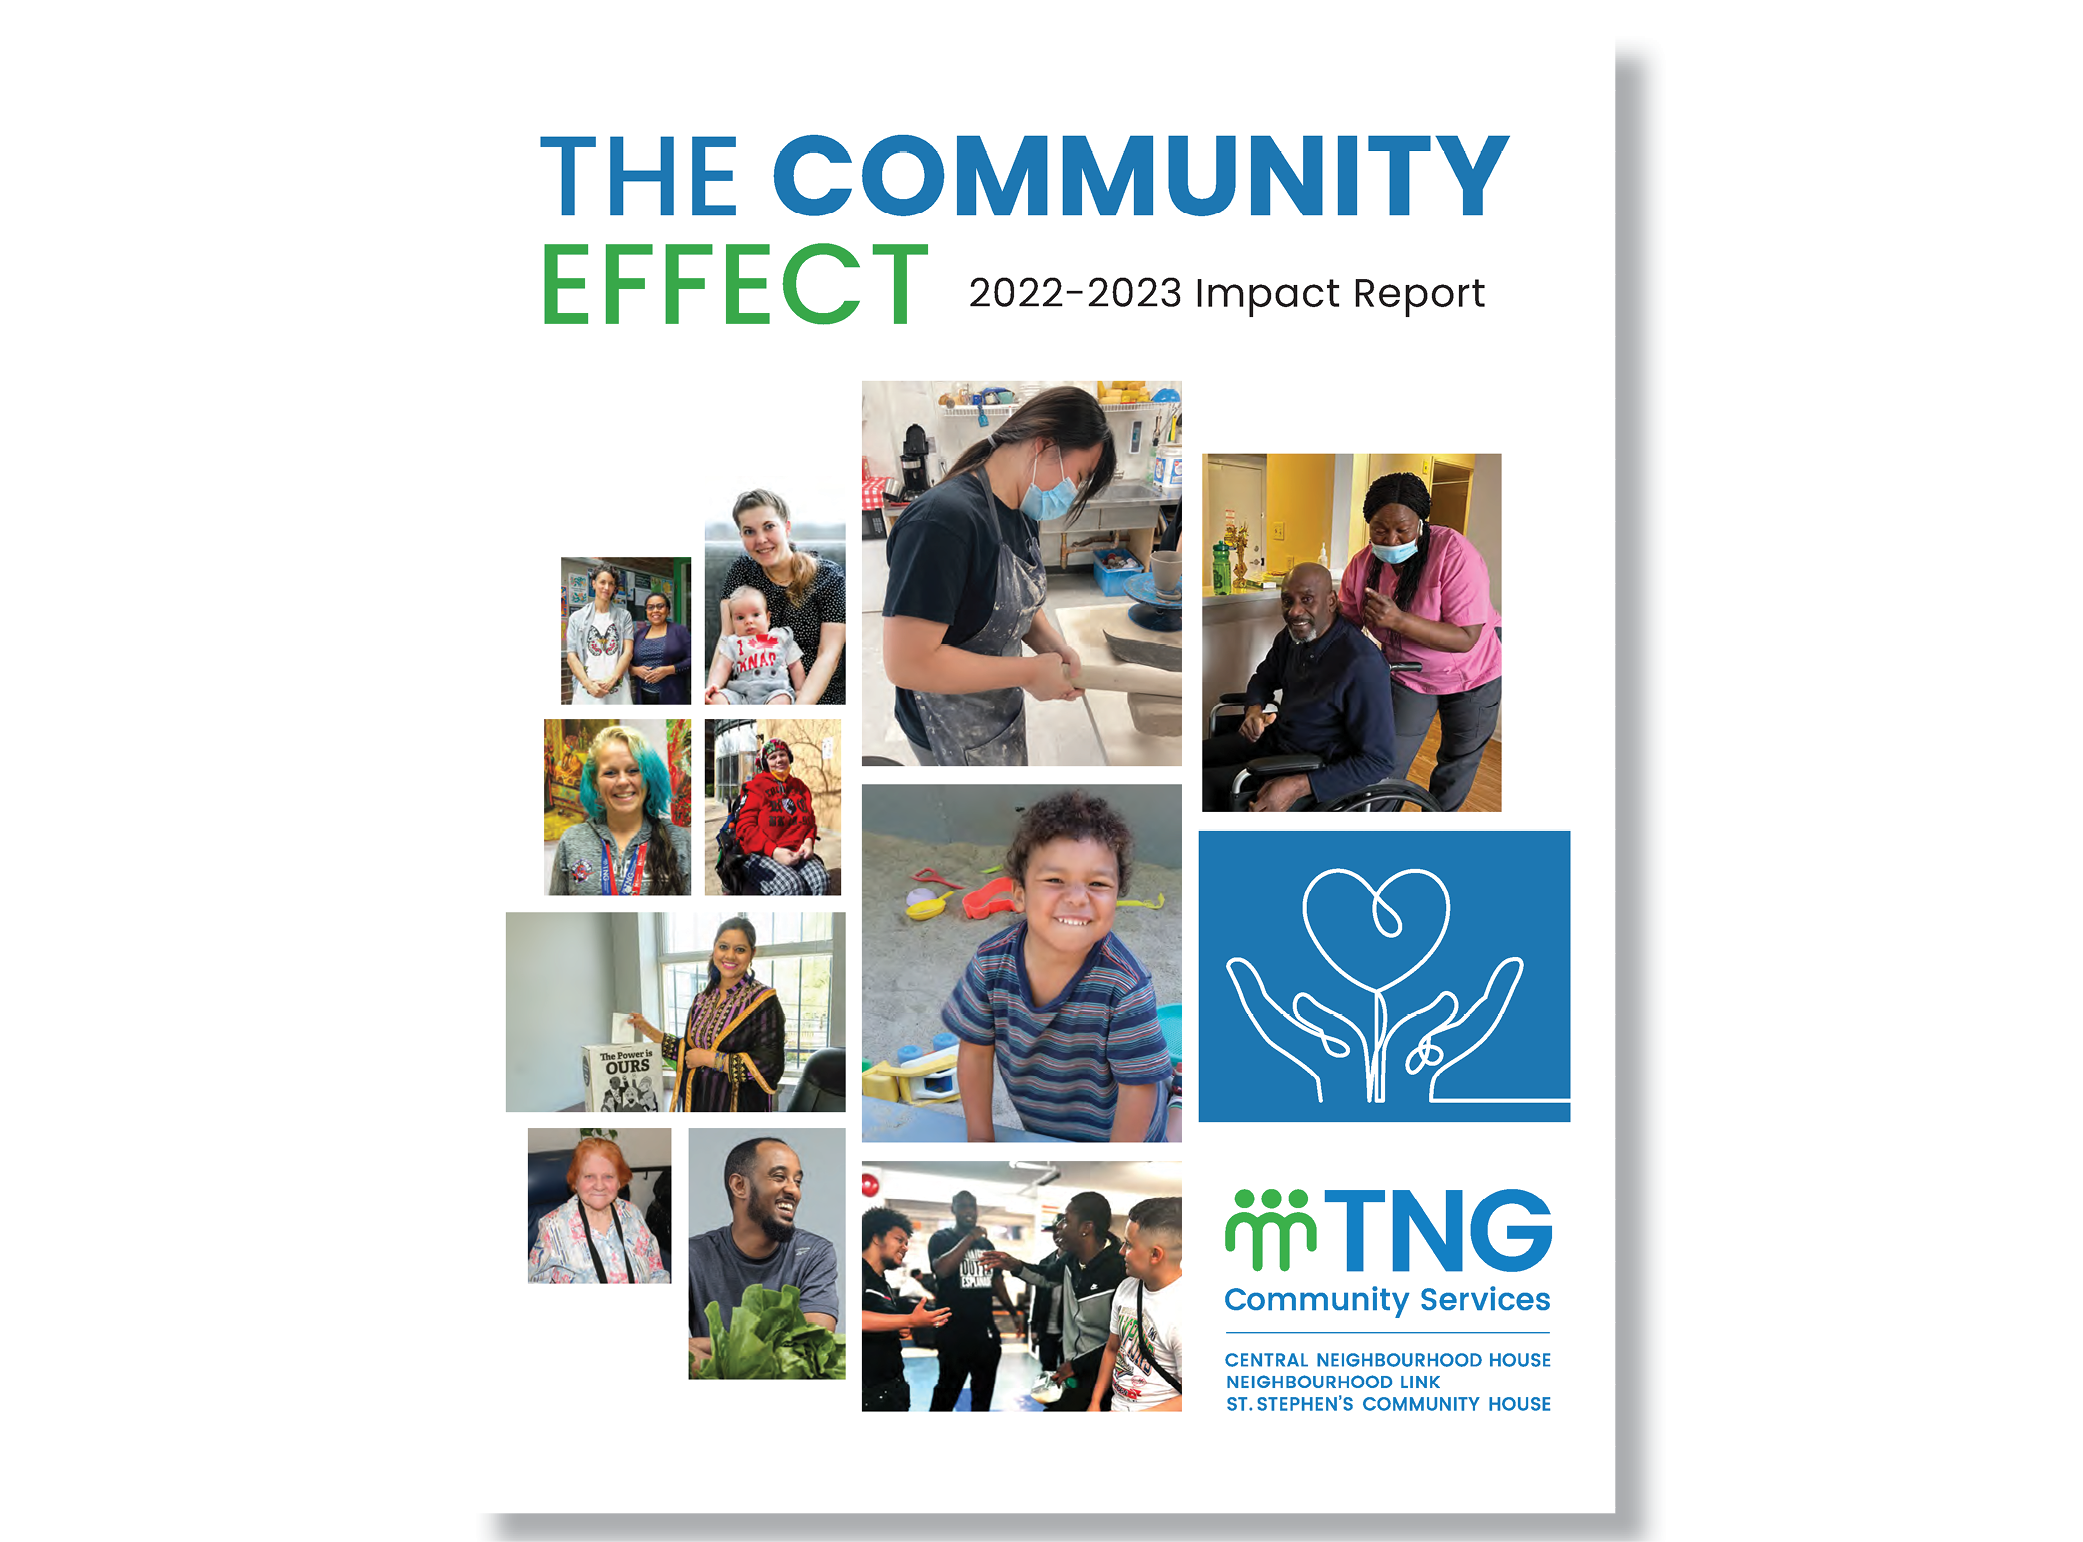 The Community Effect - Impact Report 2022-2023: The Neighbourhood Group Community Services